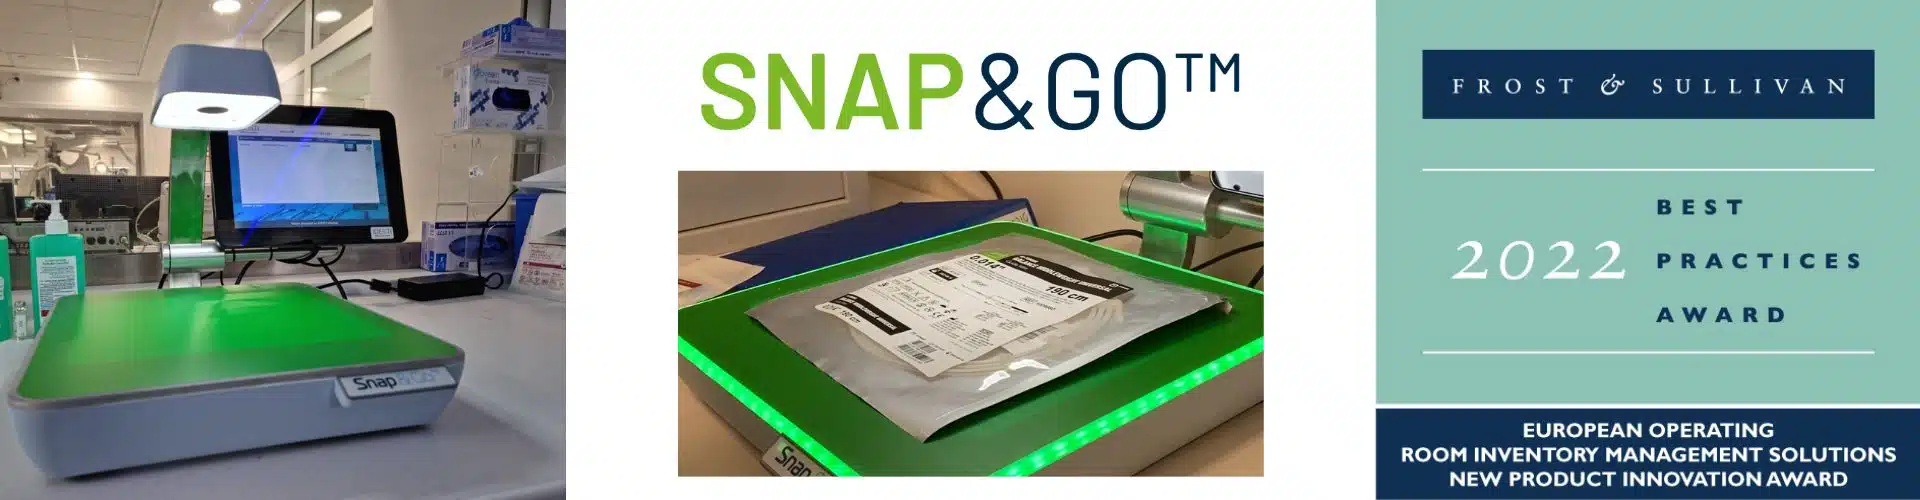 Snap & Go image recognition technology for accurate, digital utilization documentation straight to the EMR